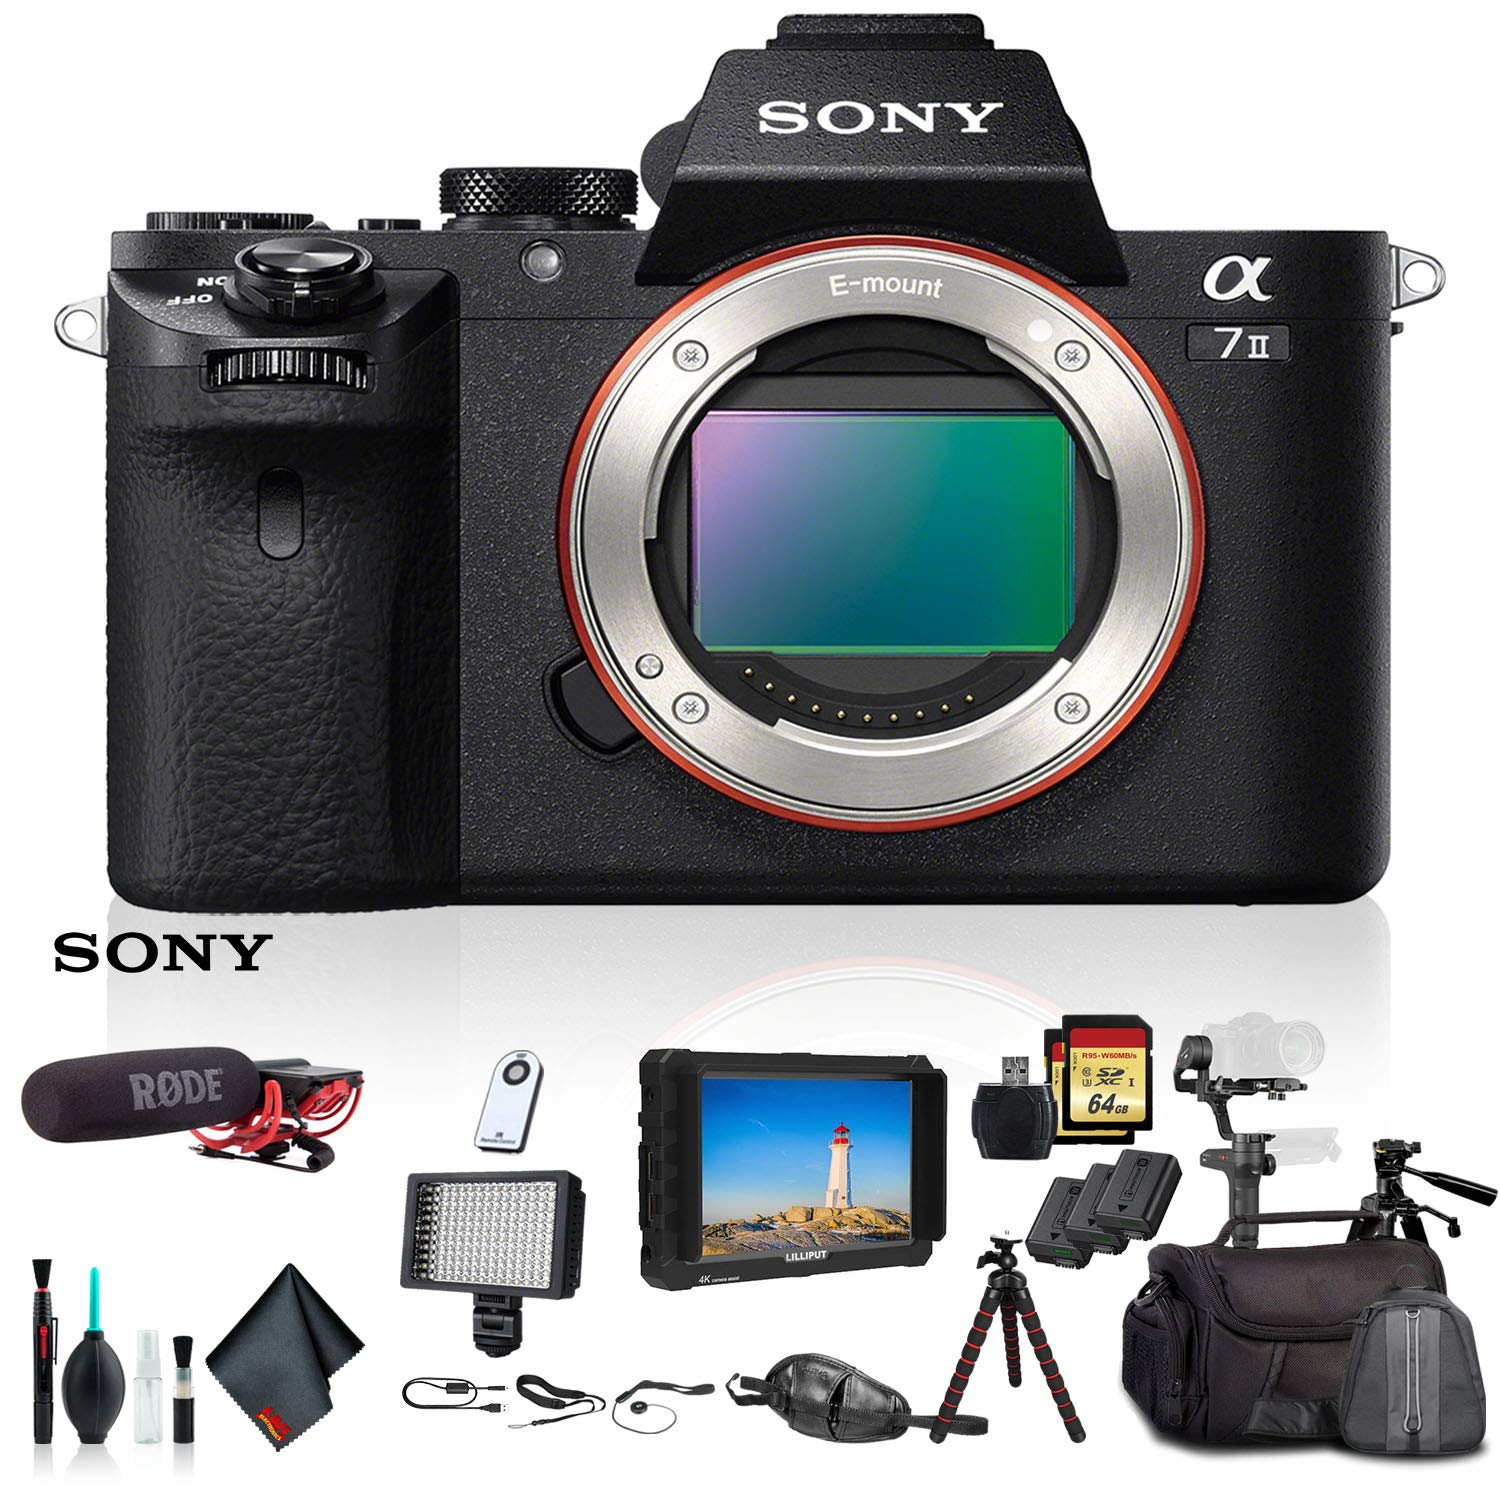 Sony Alpha a7 II Mirrorless Camera ILCE7M2/B With Soft Bag, Zhiyun-Tech Stabilizer, 2x Extra Batteries, Rode Mic, LED Light, 2x 64GB Memory Cards, External 4K Monitor , Plus Essential Accessories